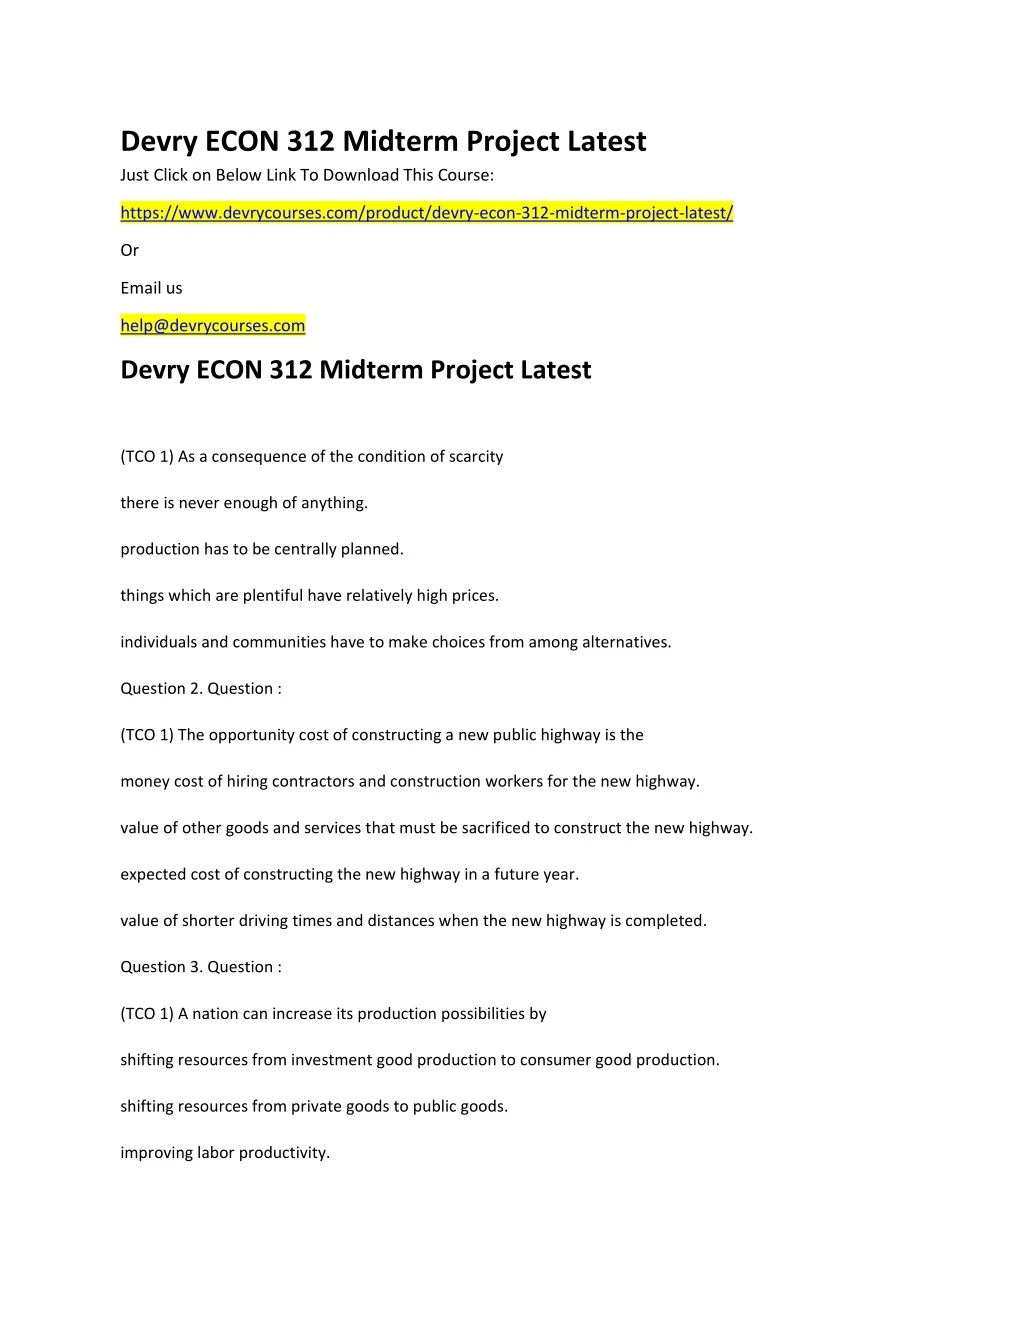 devry econ 312 midterm project latest just click